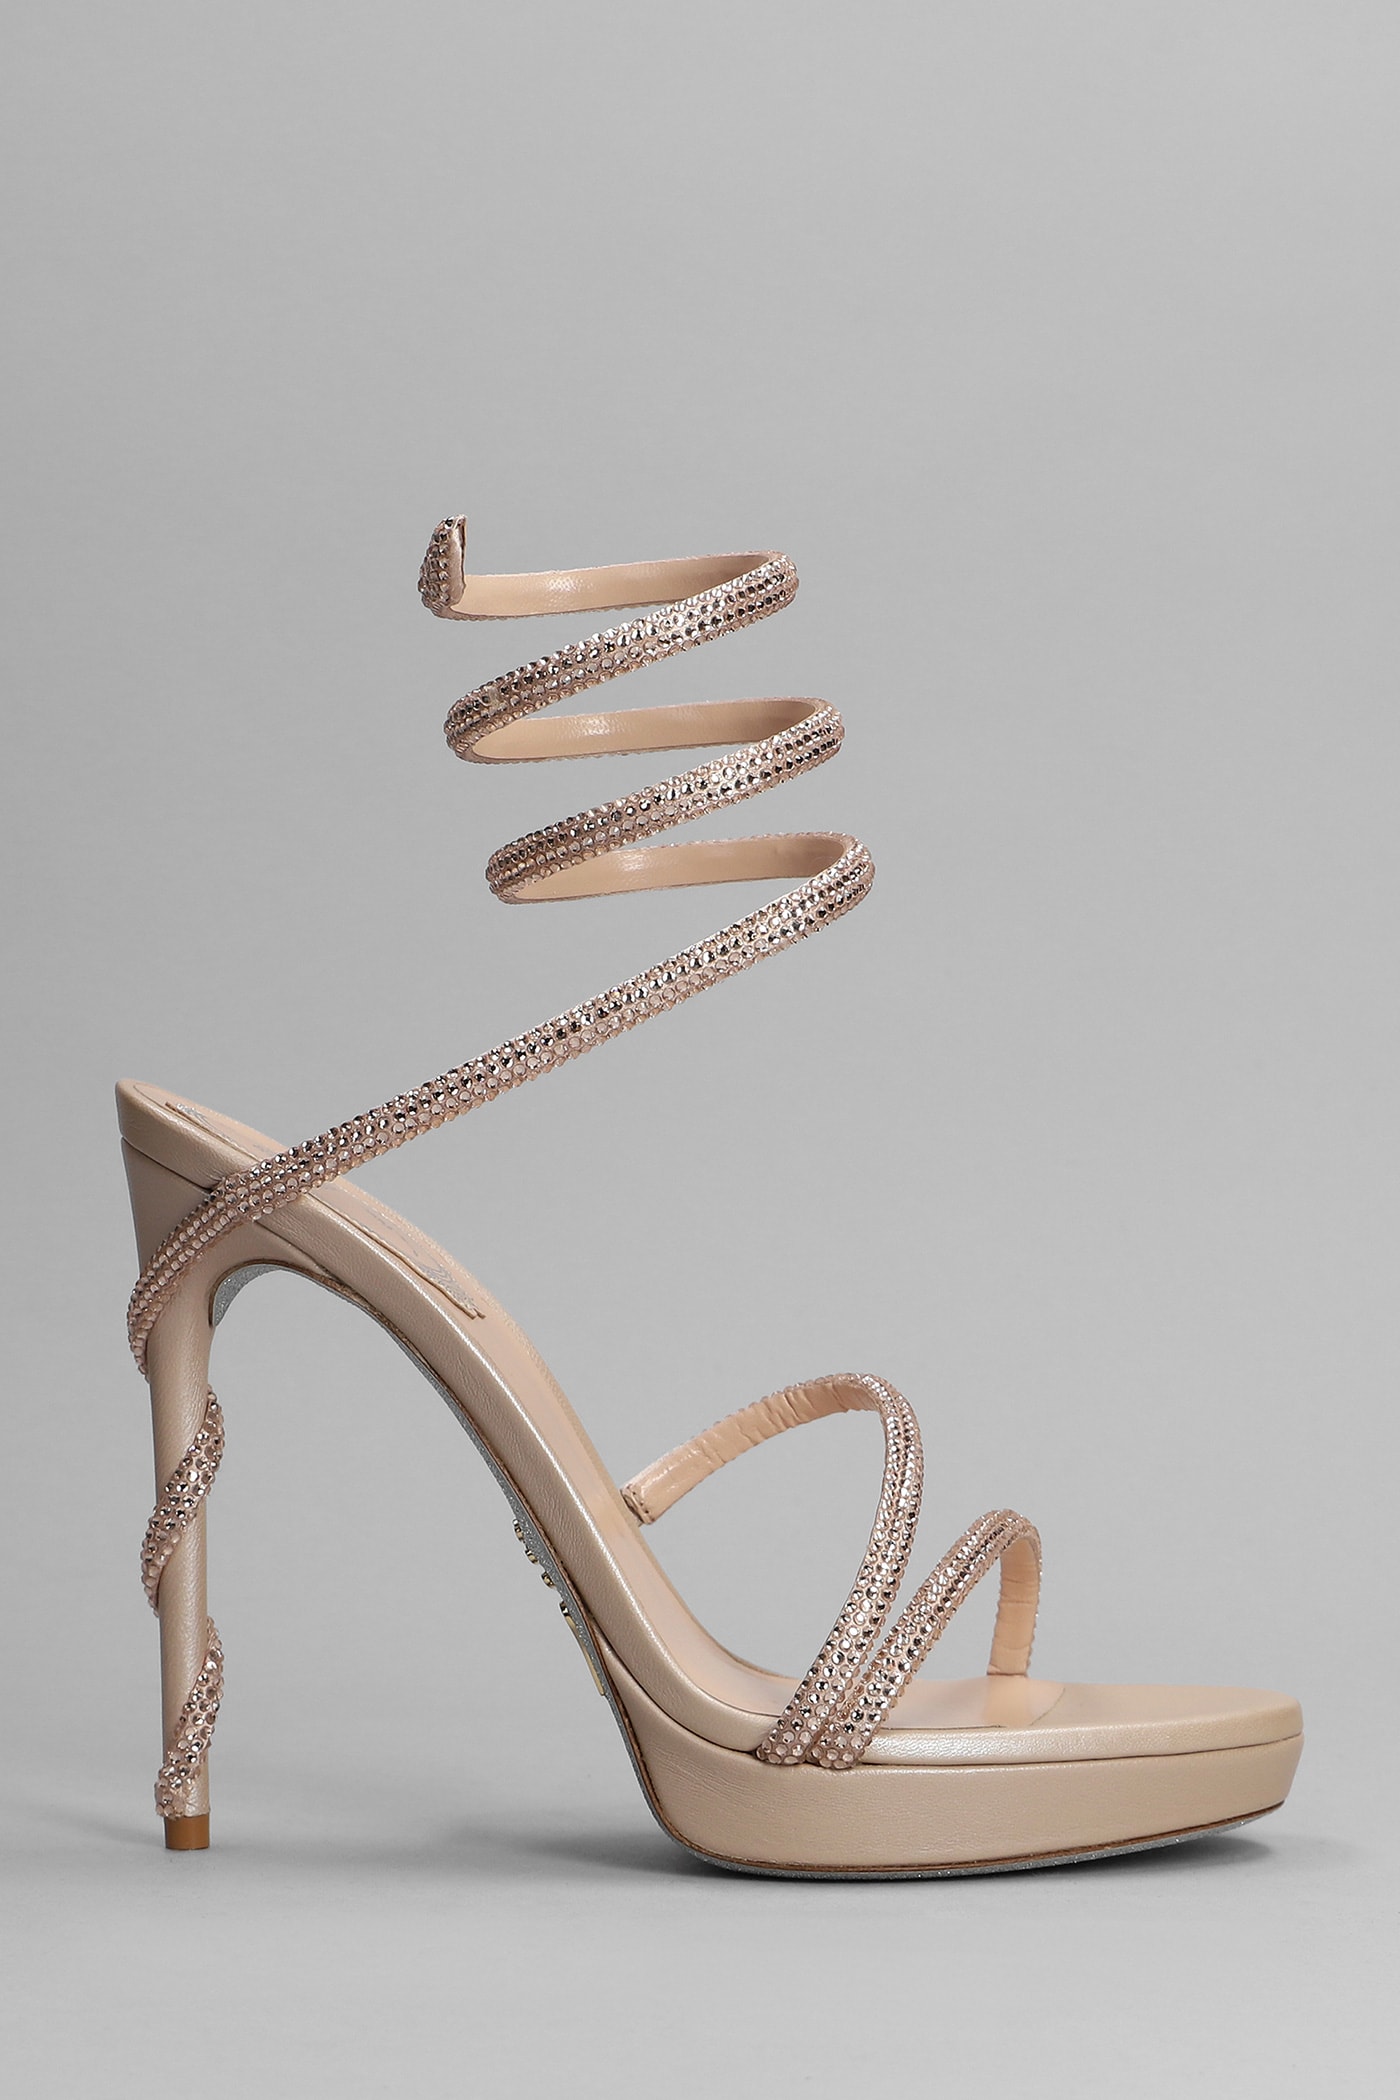 René Caovilla Sandals In Powder Leather In Pink